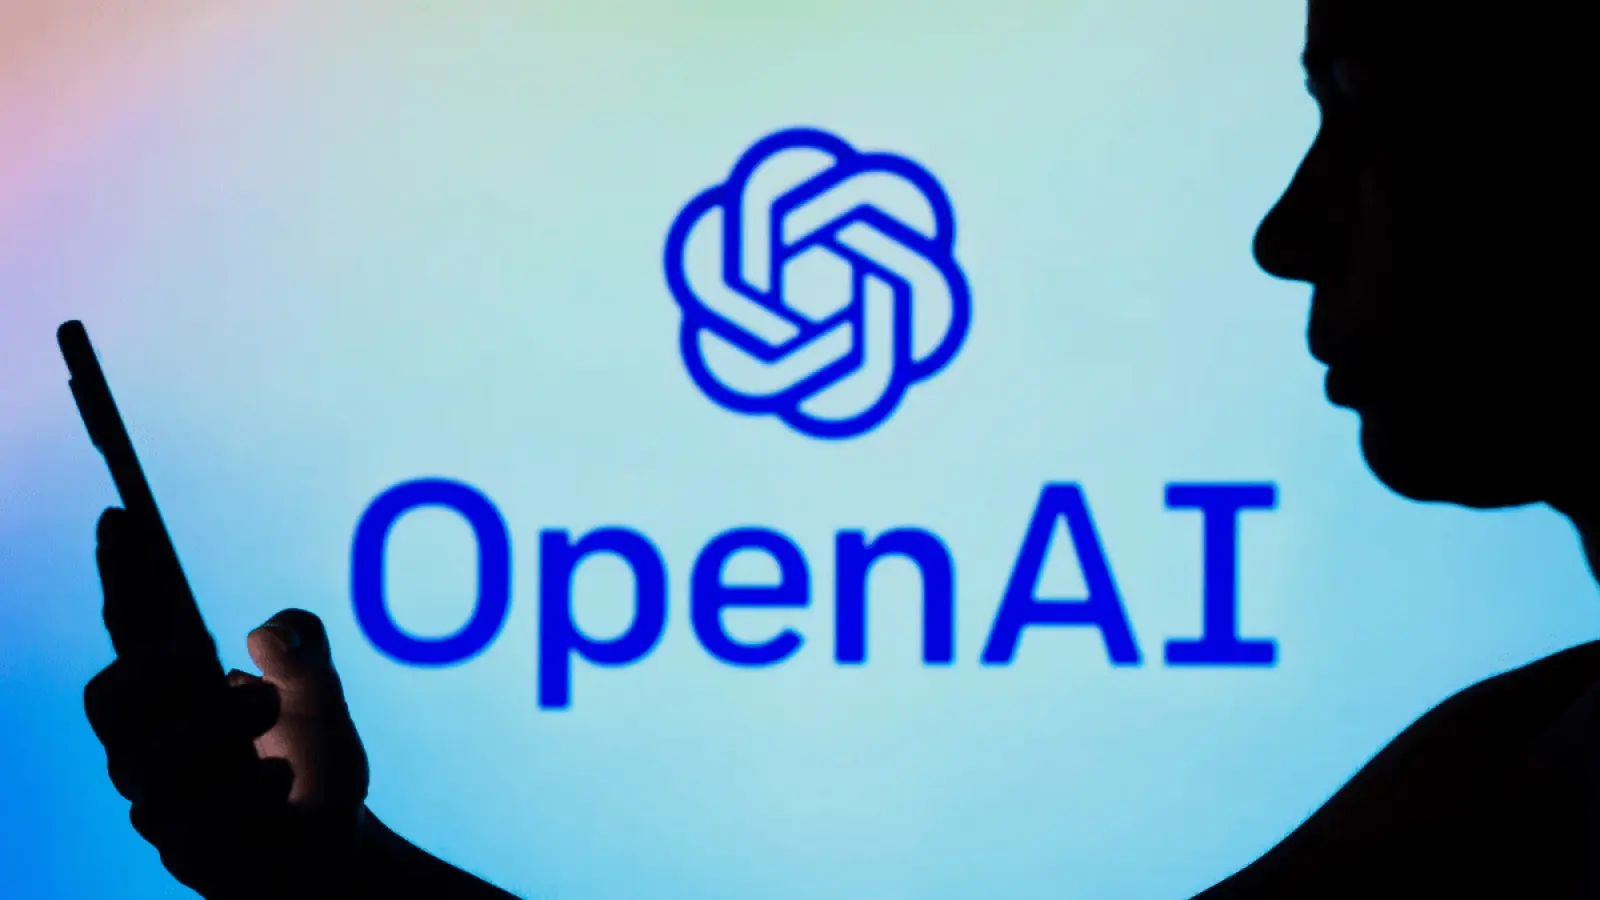 Content creators are in for a treat, OpenAI is preparing a media manager tool